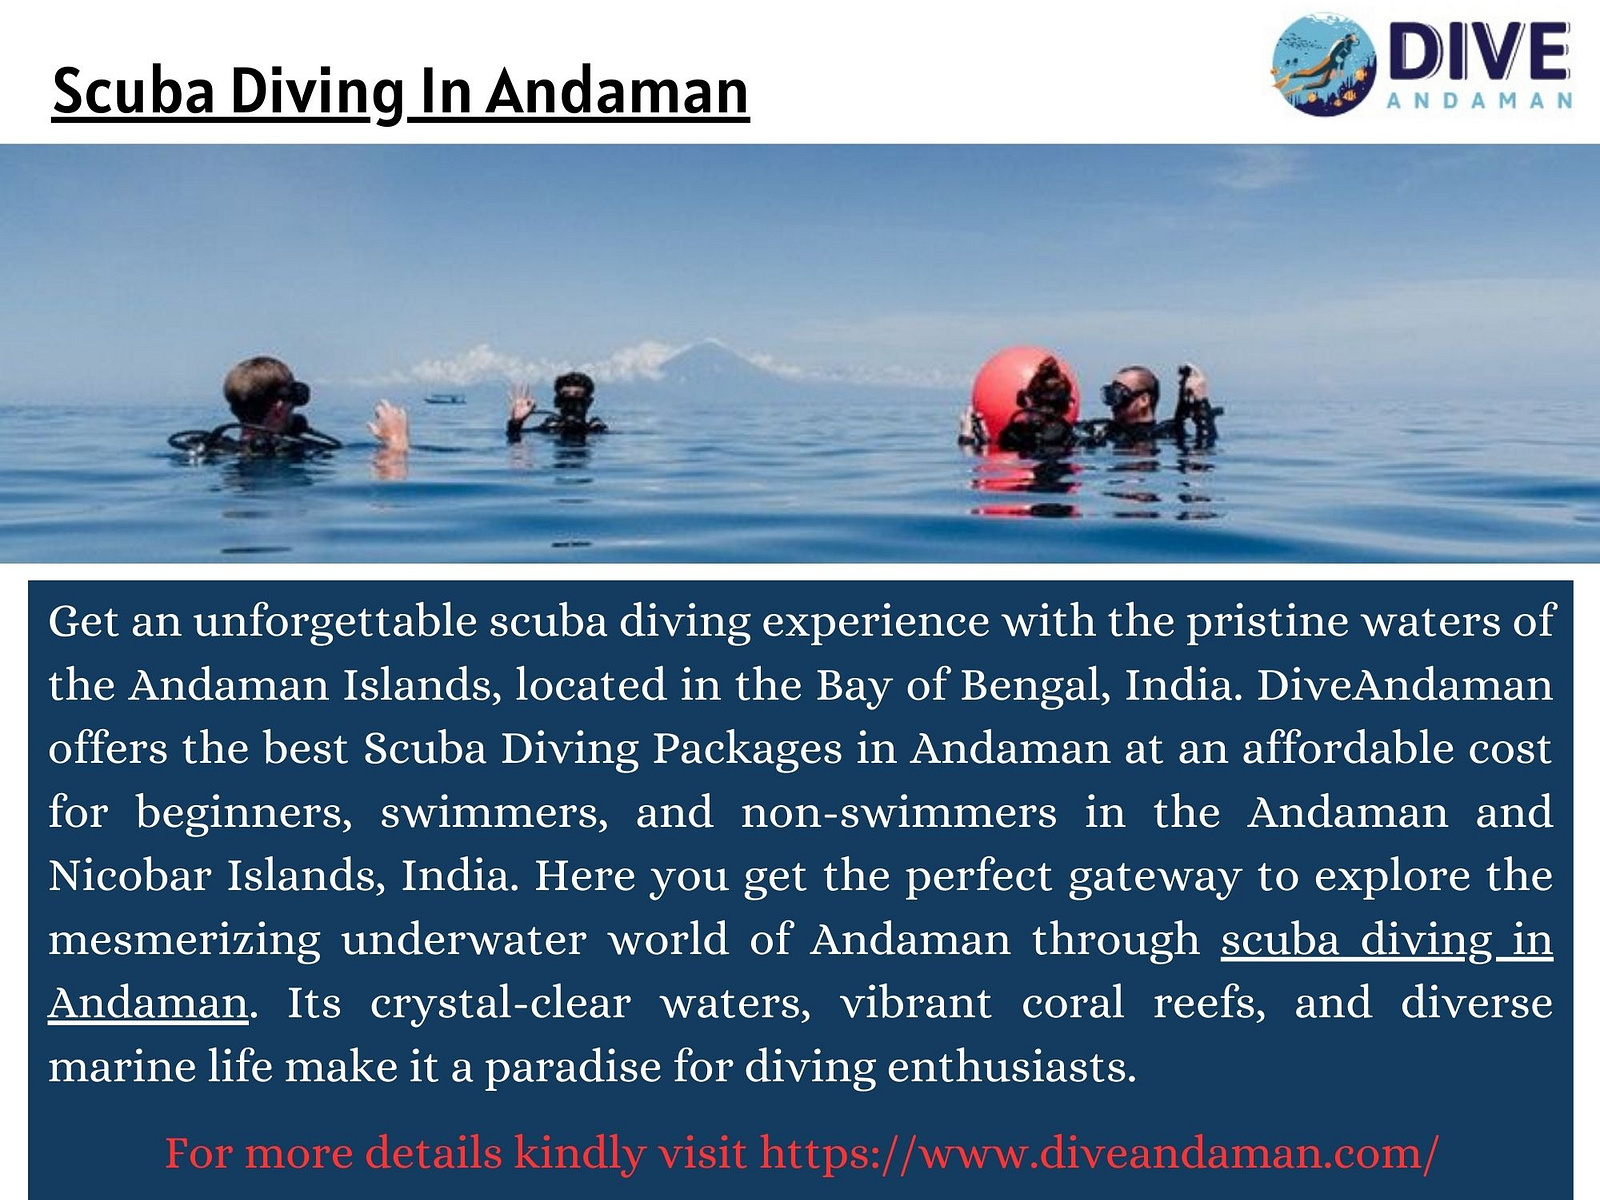 Top Scuba Diving In Andaman by Dive Andaman on Dribbble